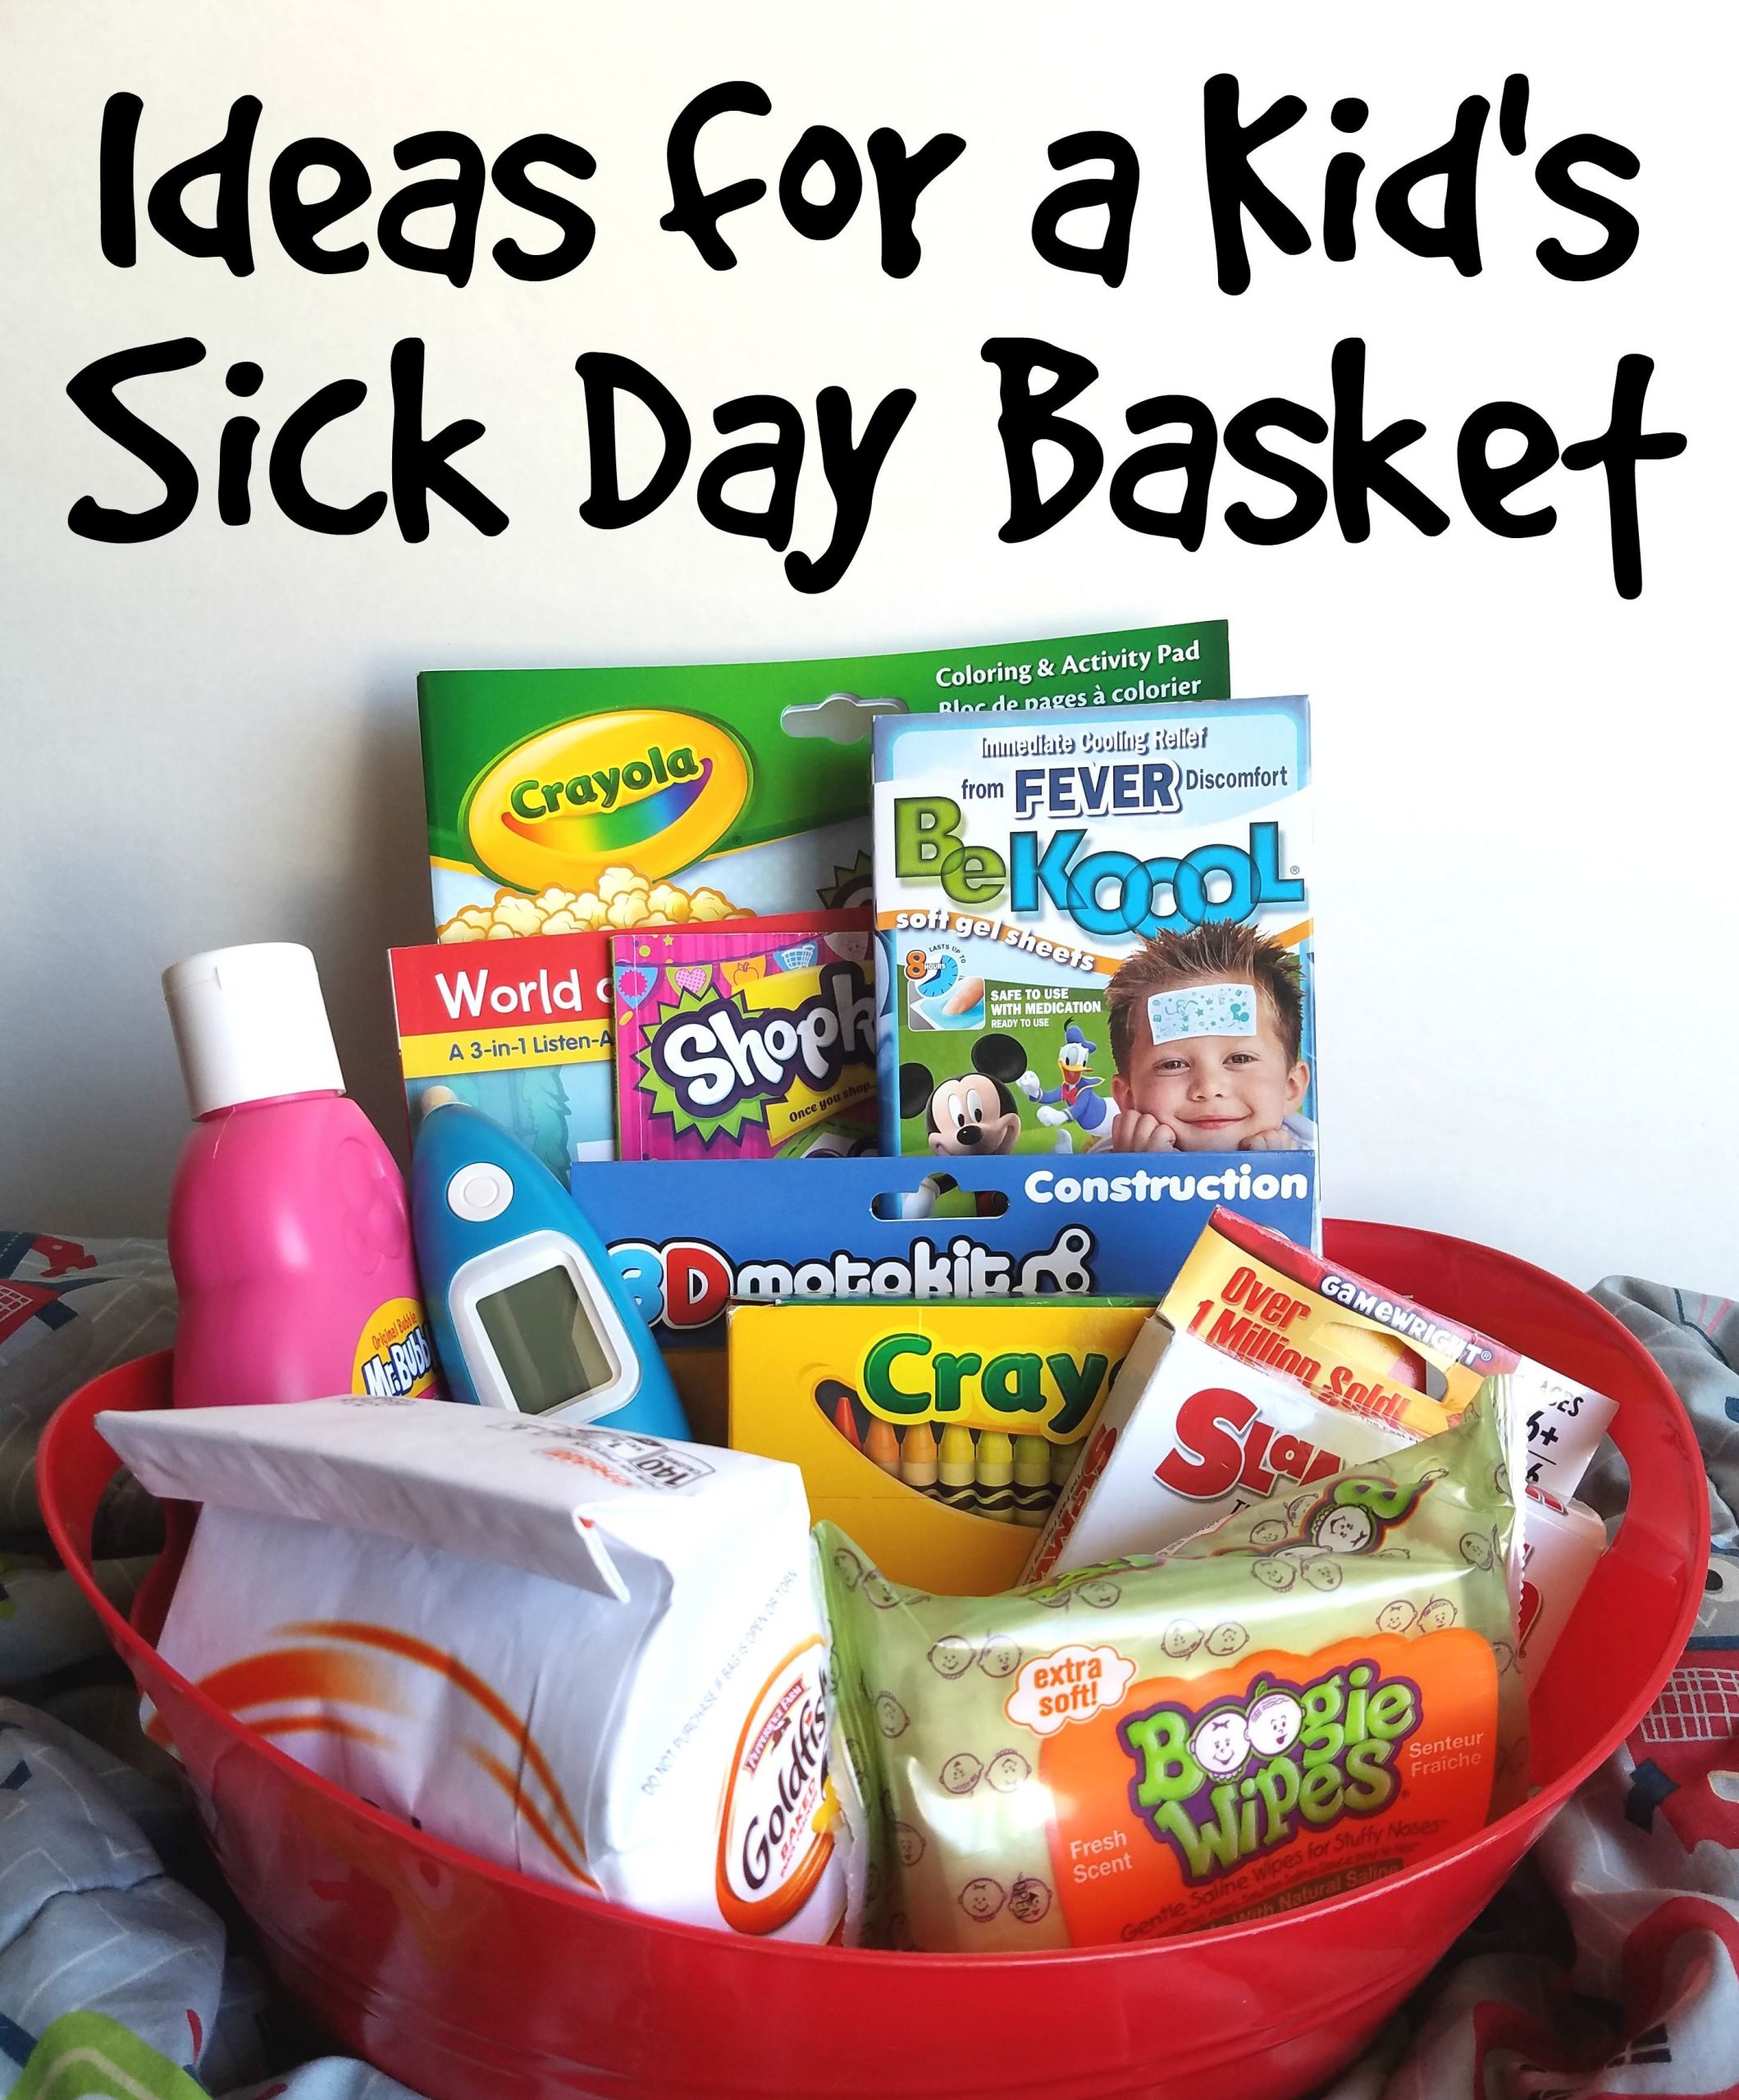 Get Well Gifts For Kids
 Sick Day Basket For Kids